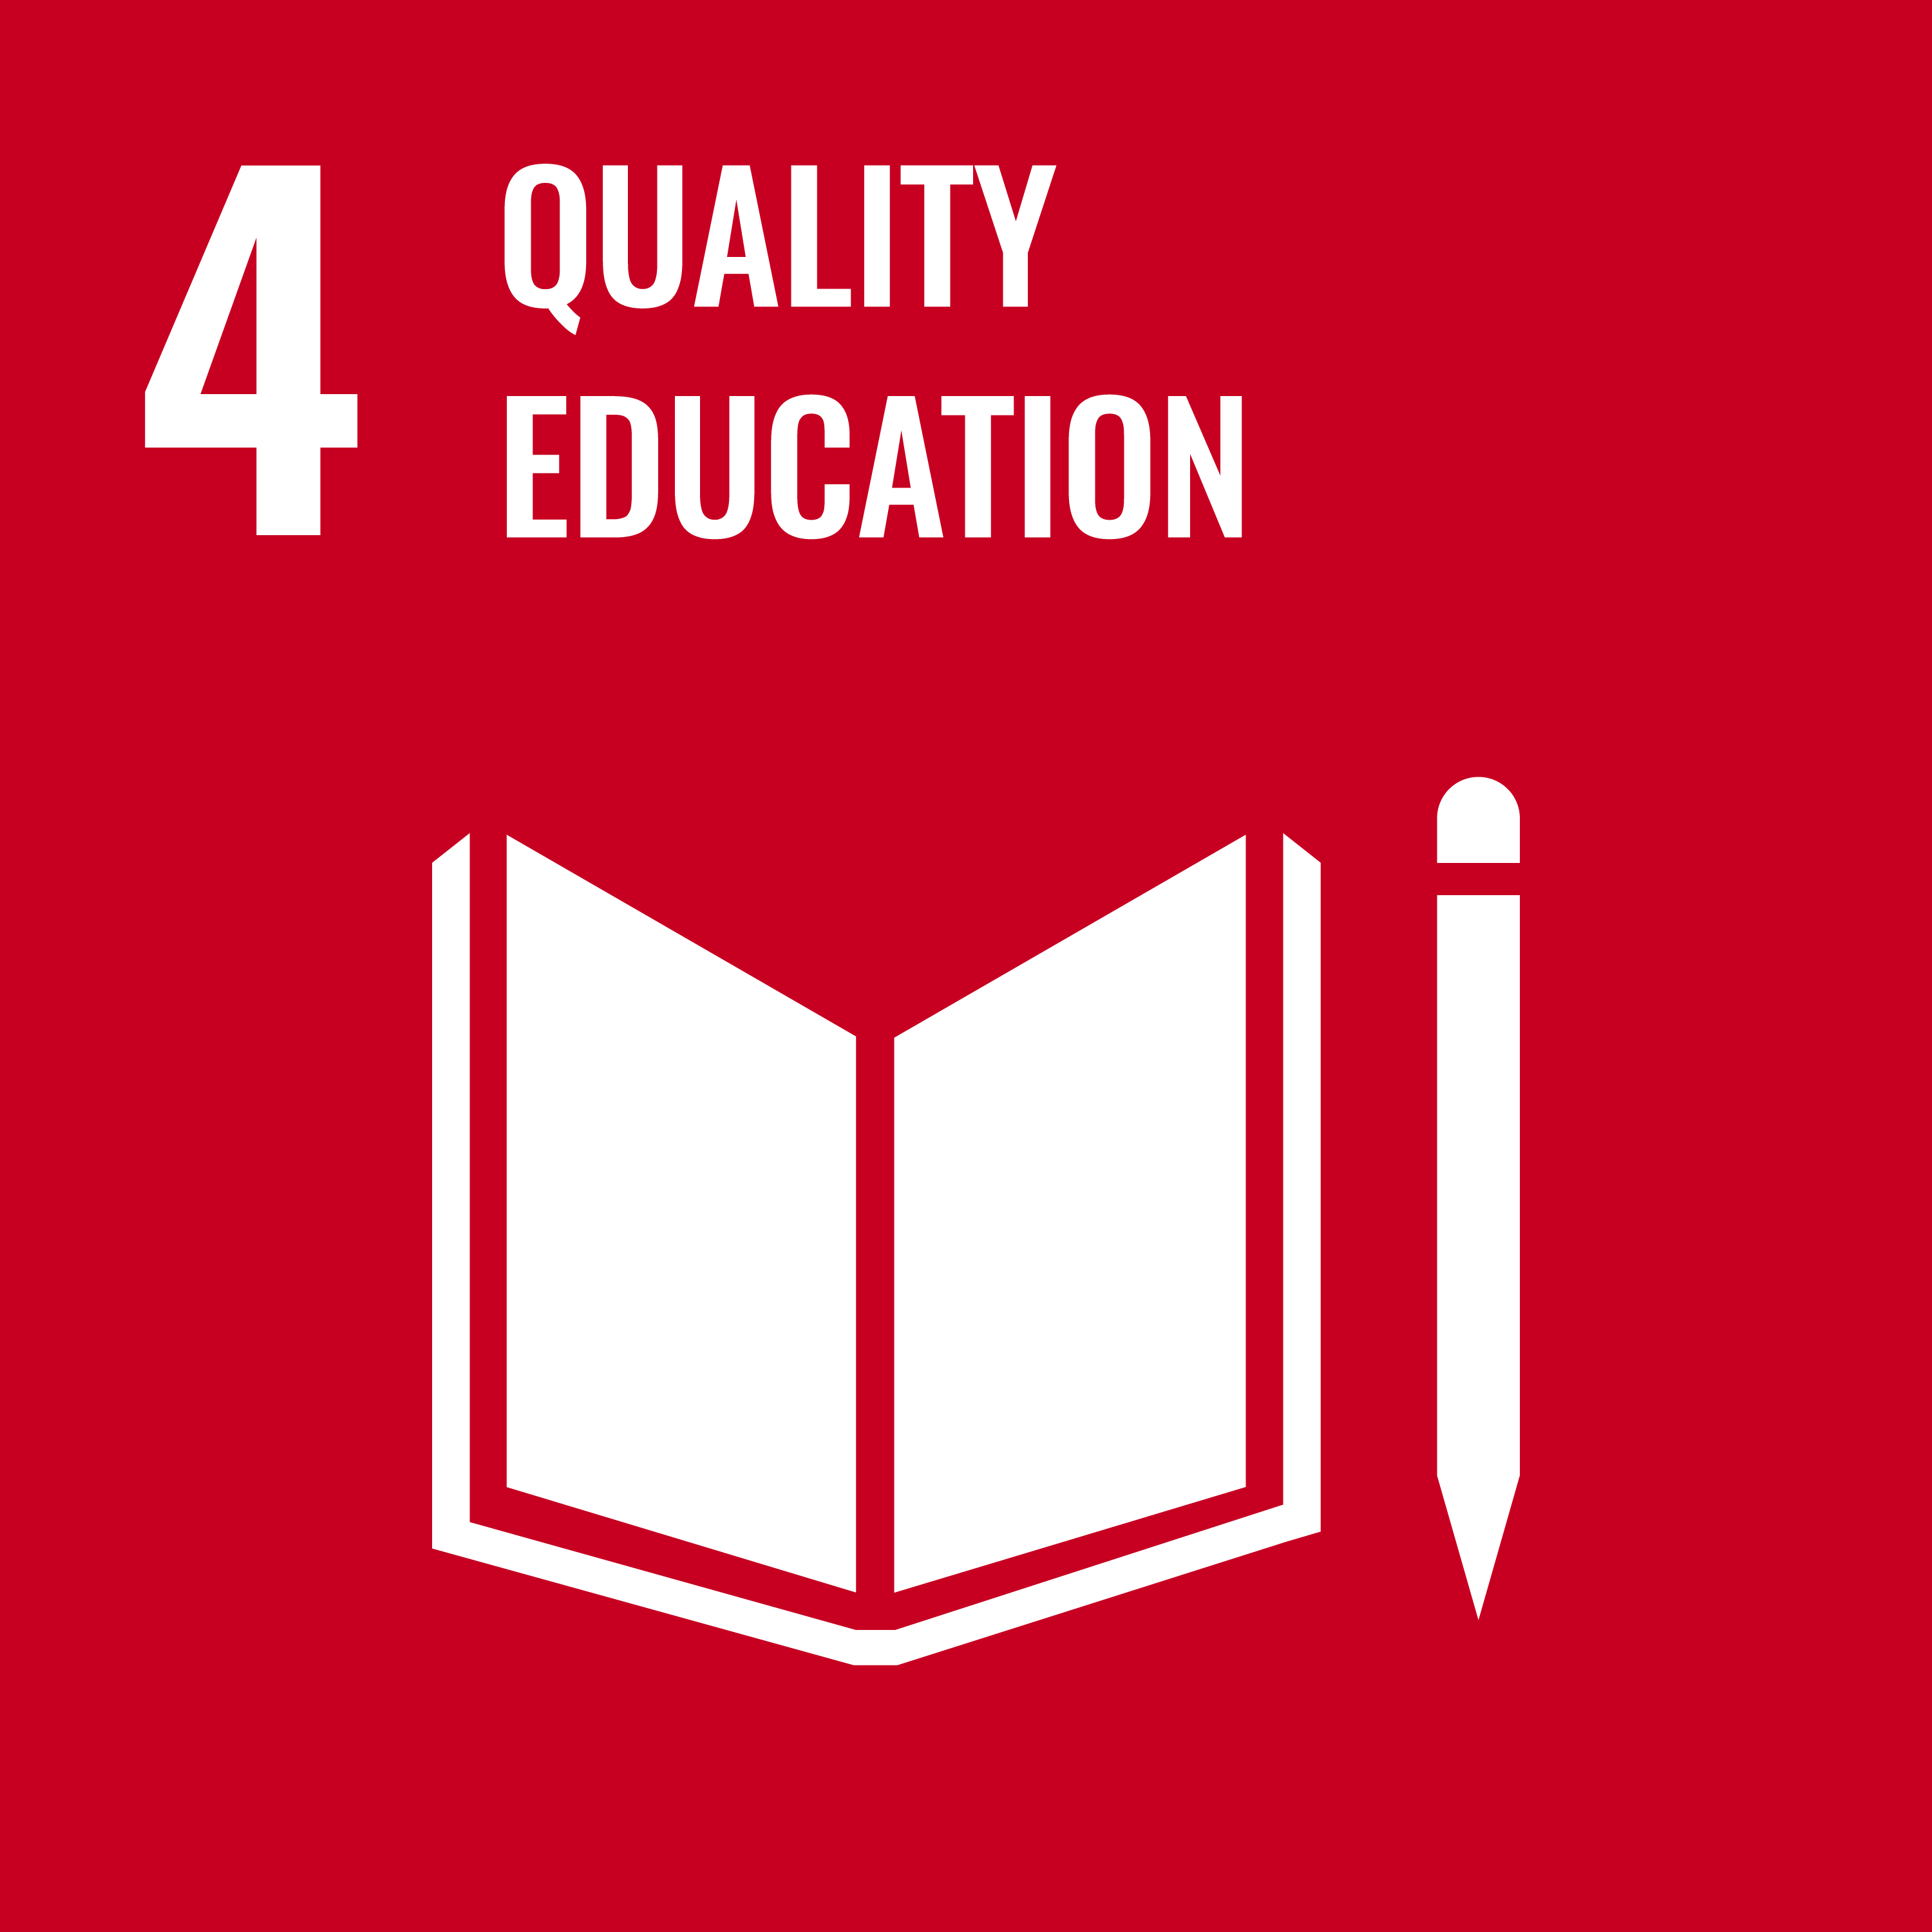 A red icon depicting a book and pencil and the text "4: quality education"